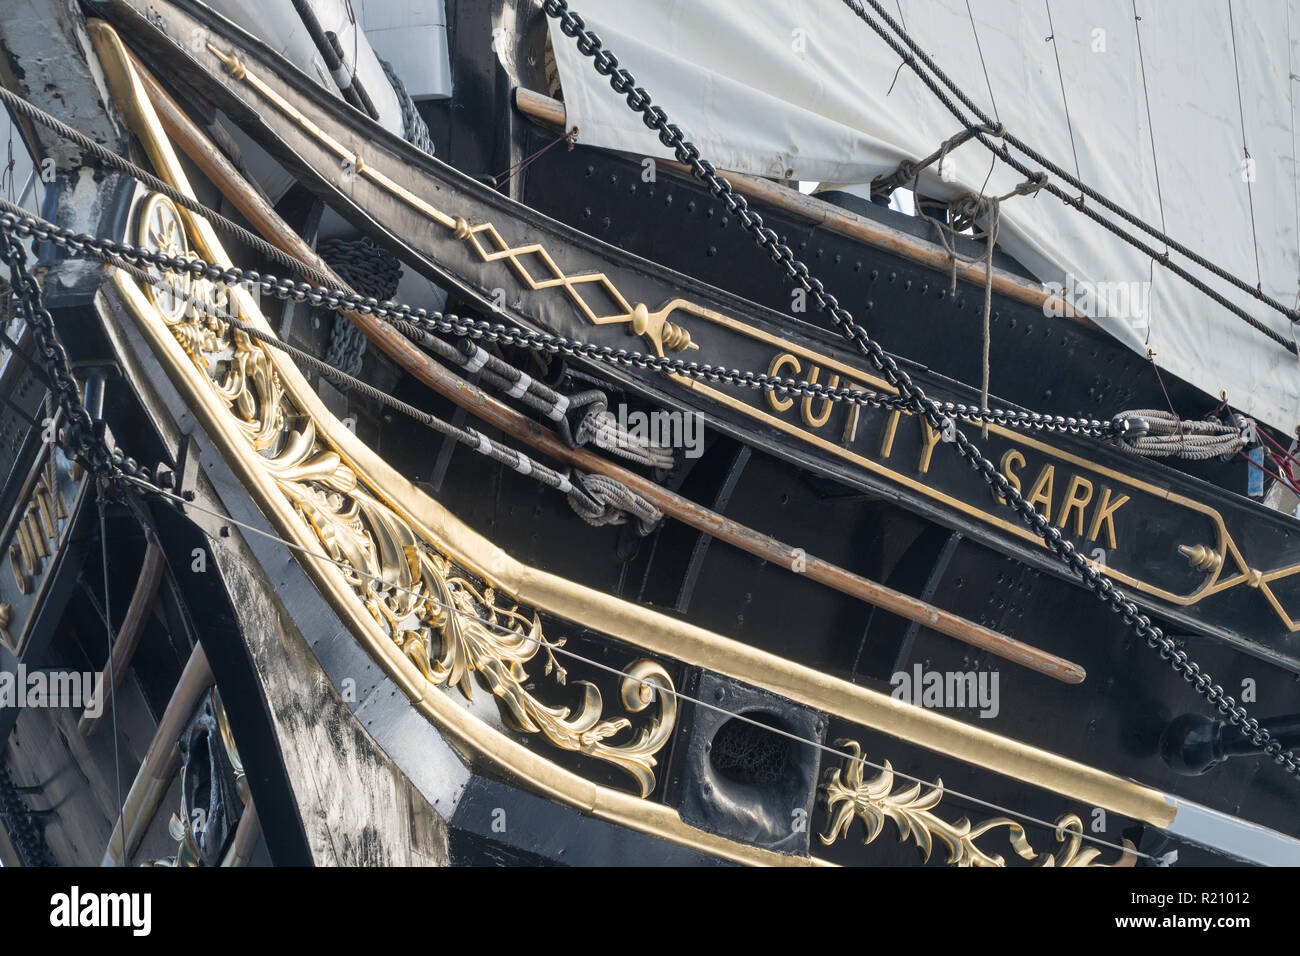 Detail of the Cutty Sark in Greenwich. From the Open City Thames Architecture Tour East. Photo date: Saturday, November 10, 2018. Photo: Roger Garfiel Stock Photo